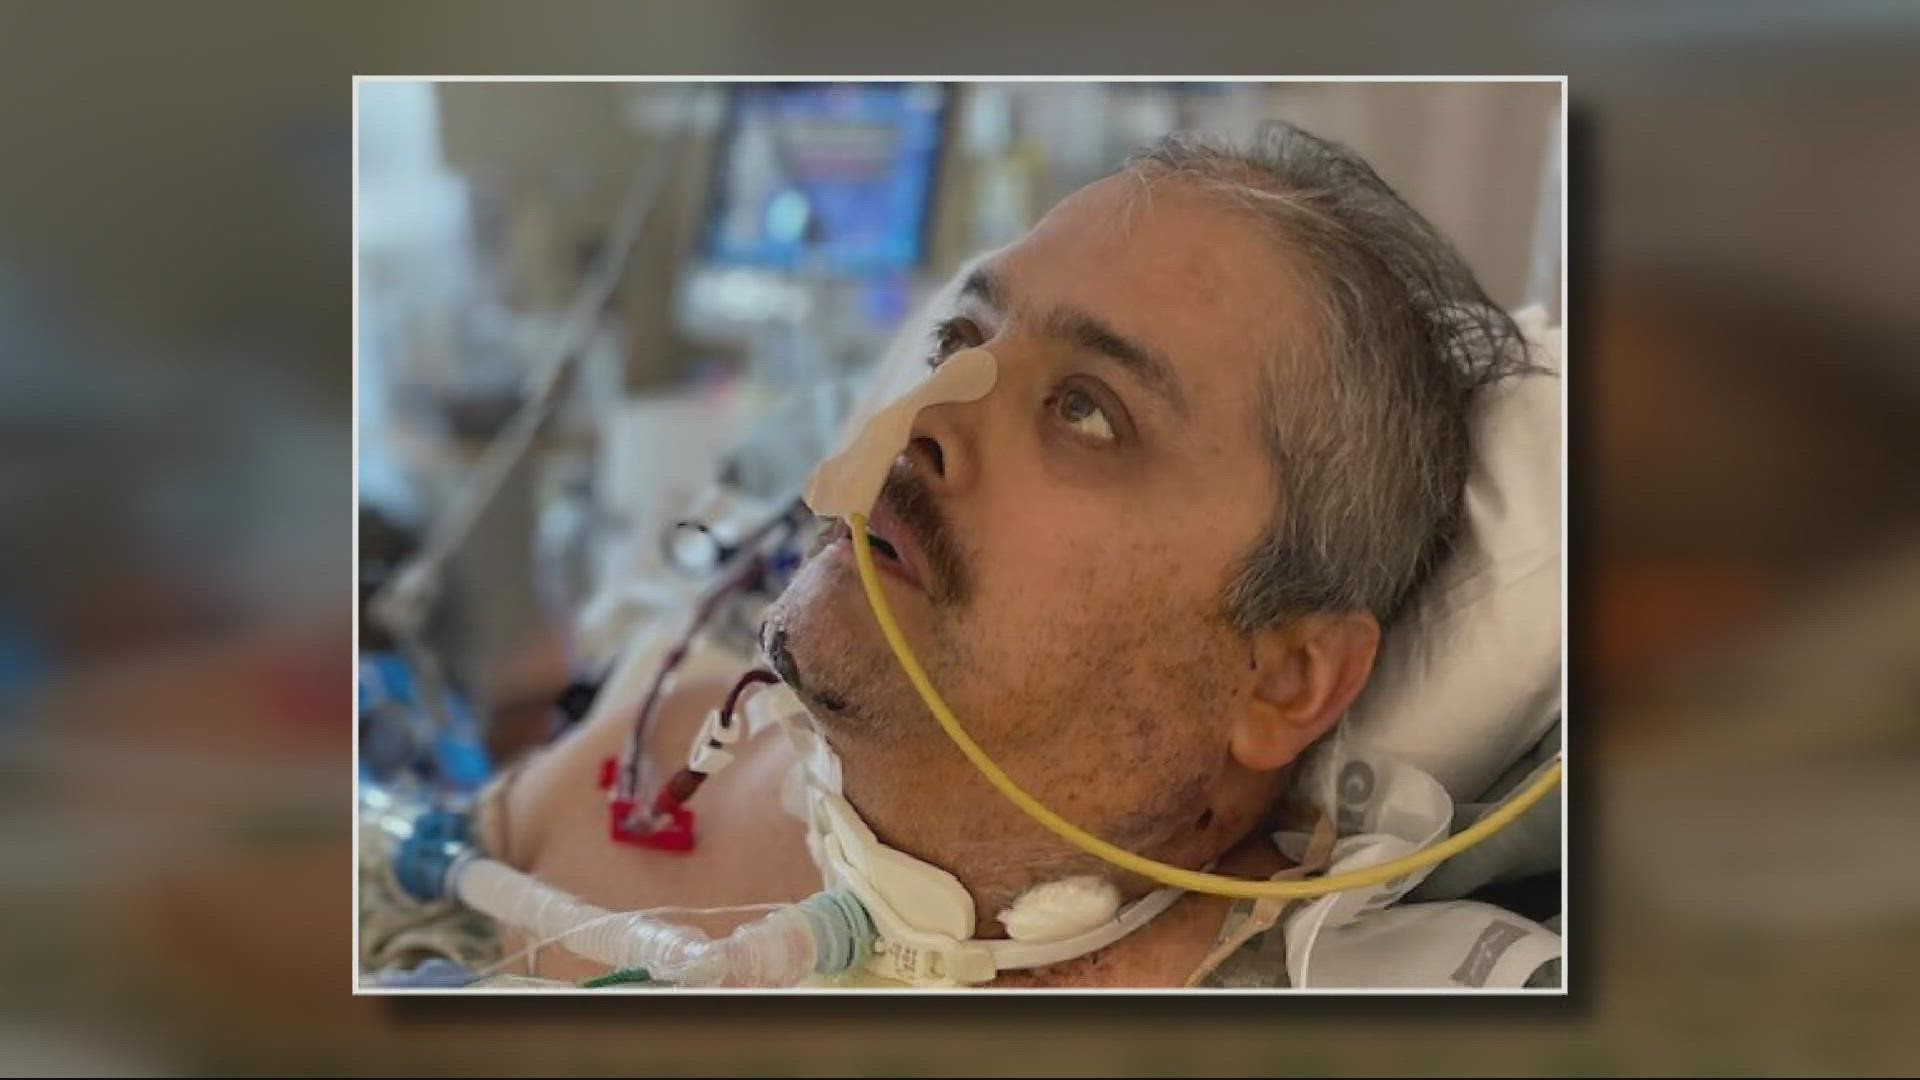 49-year-old David Alvarez spent more than 80 days in the intensive care unit at Salem Health. Morgan Romero shares his coronavirus treatment and recovery story.